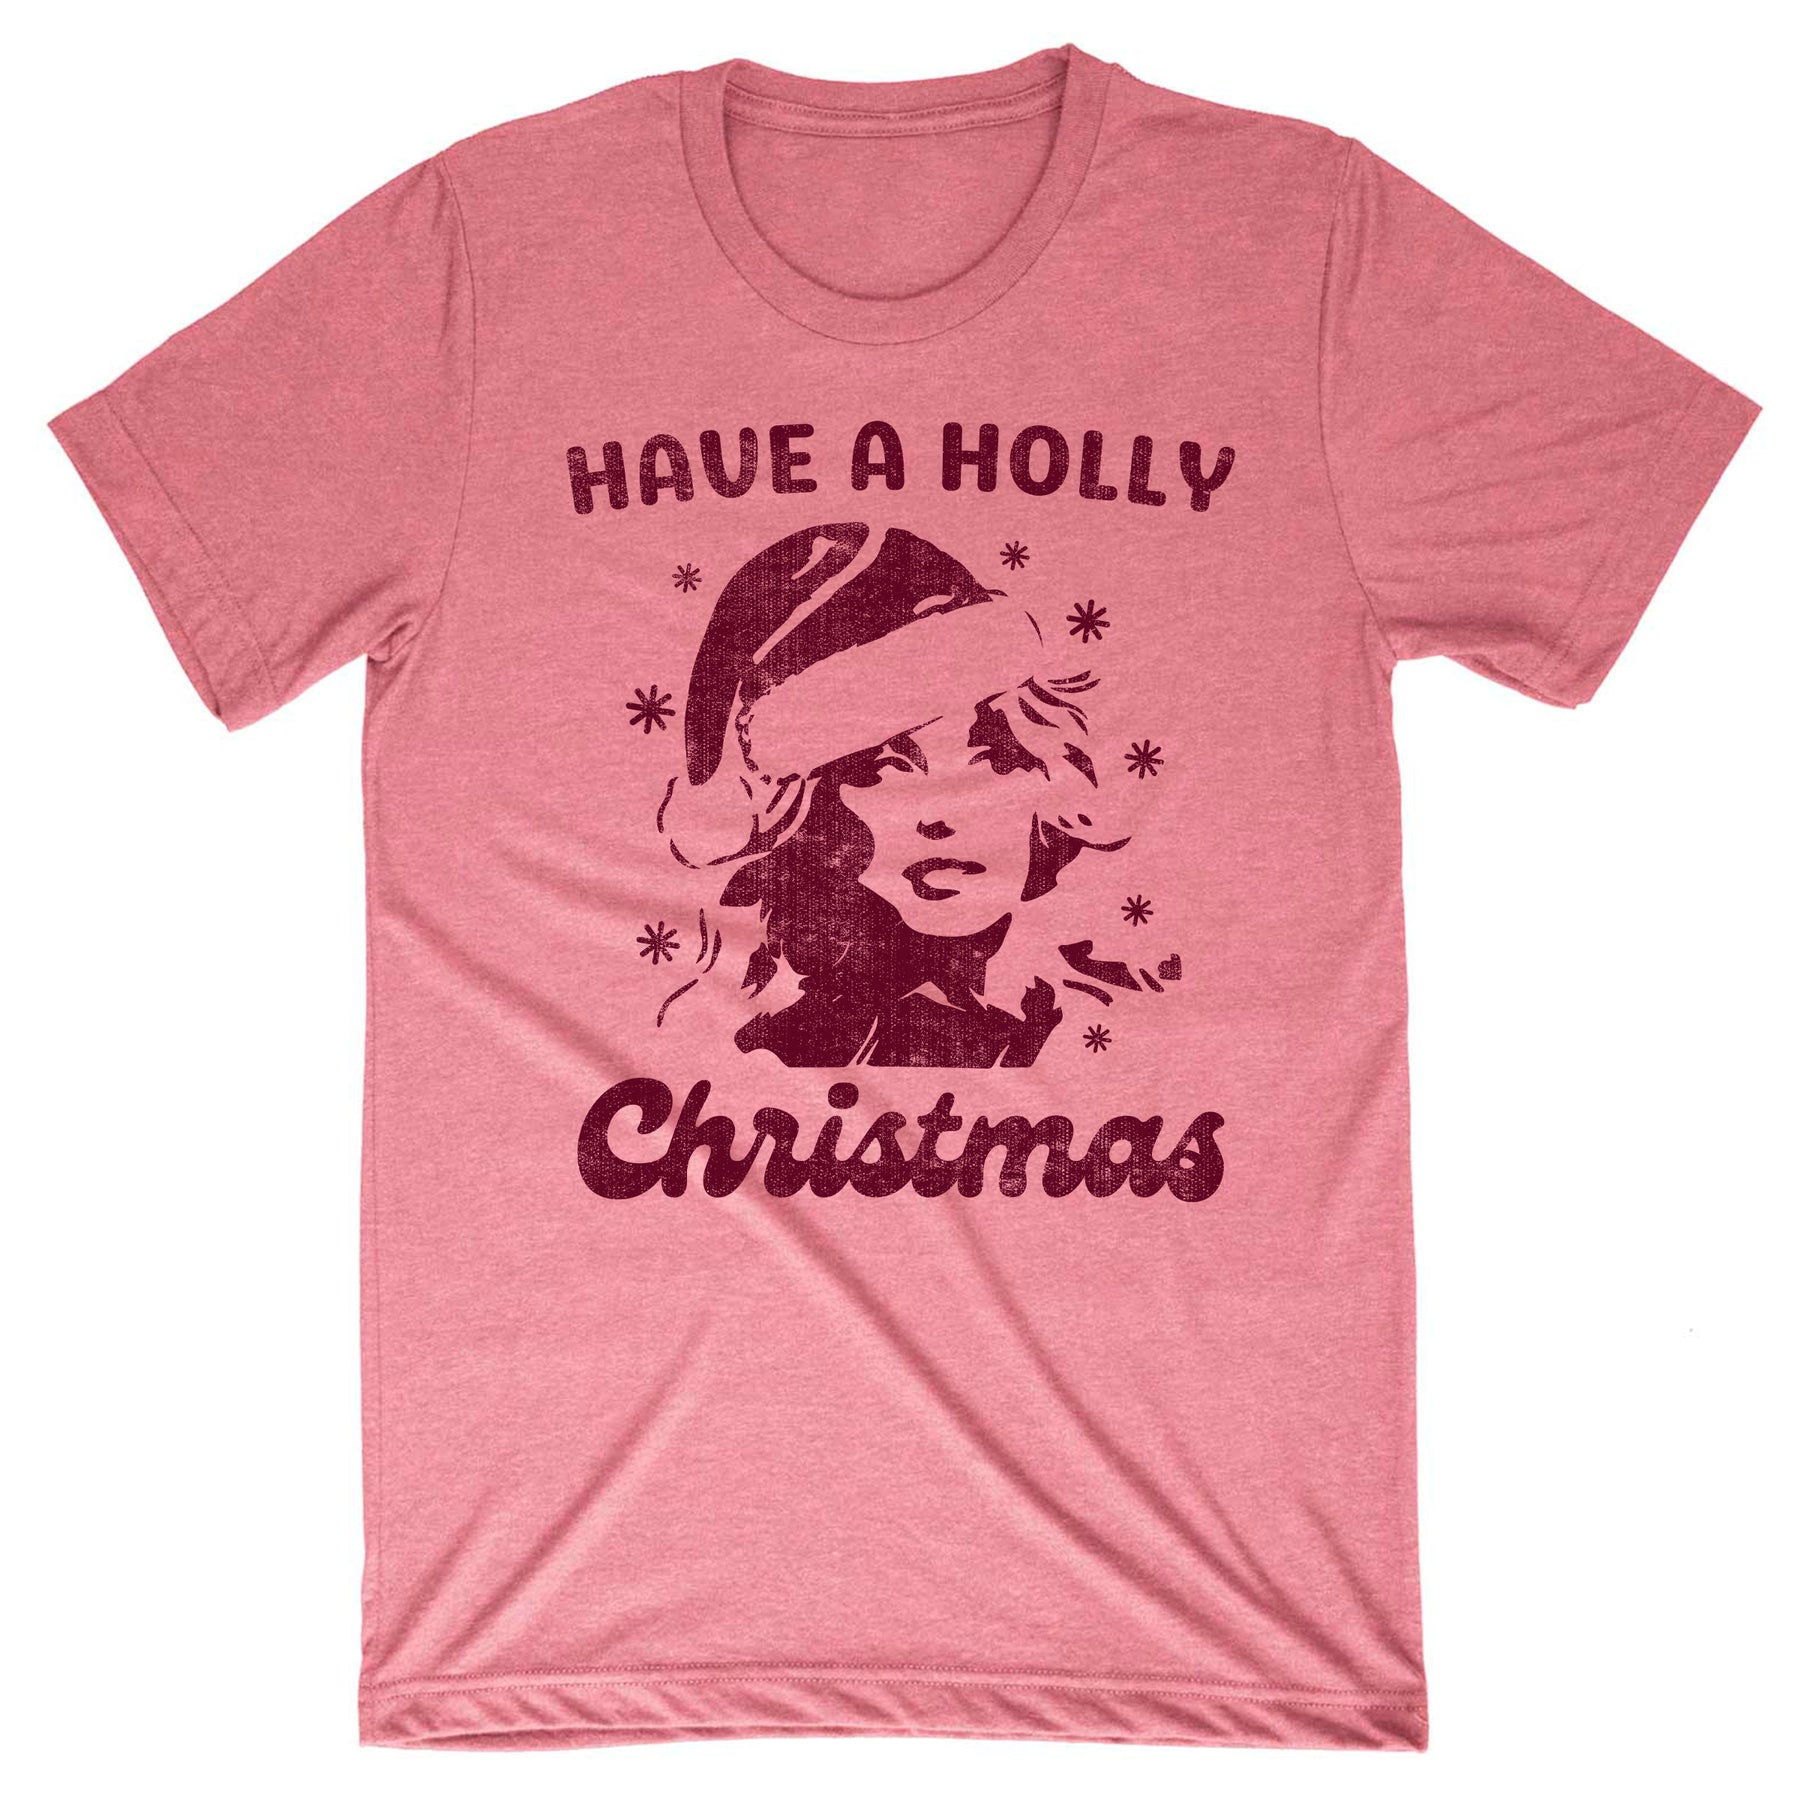 Have a Holly Dolly Christmas Tee